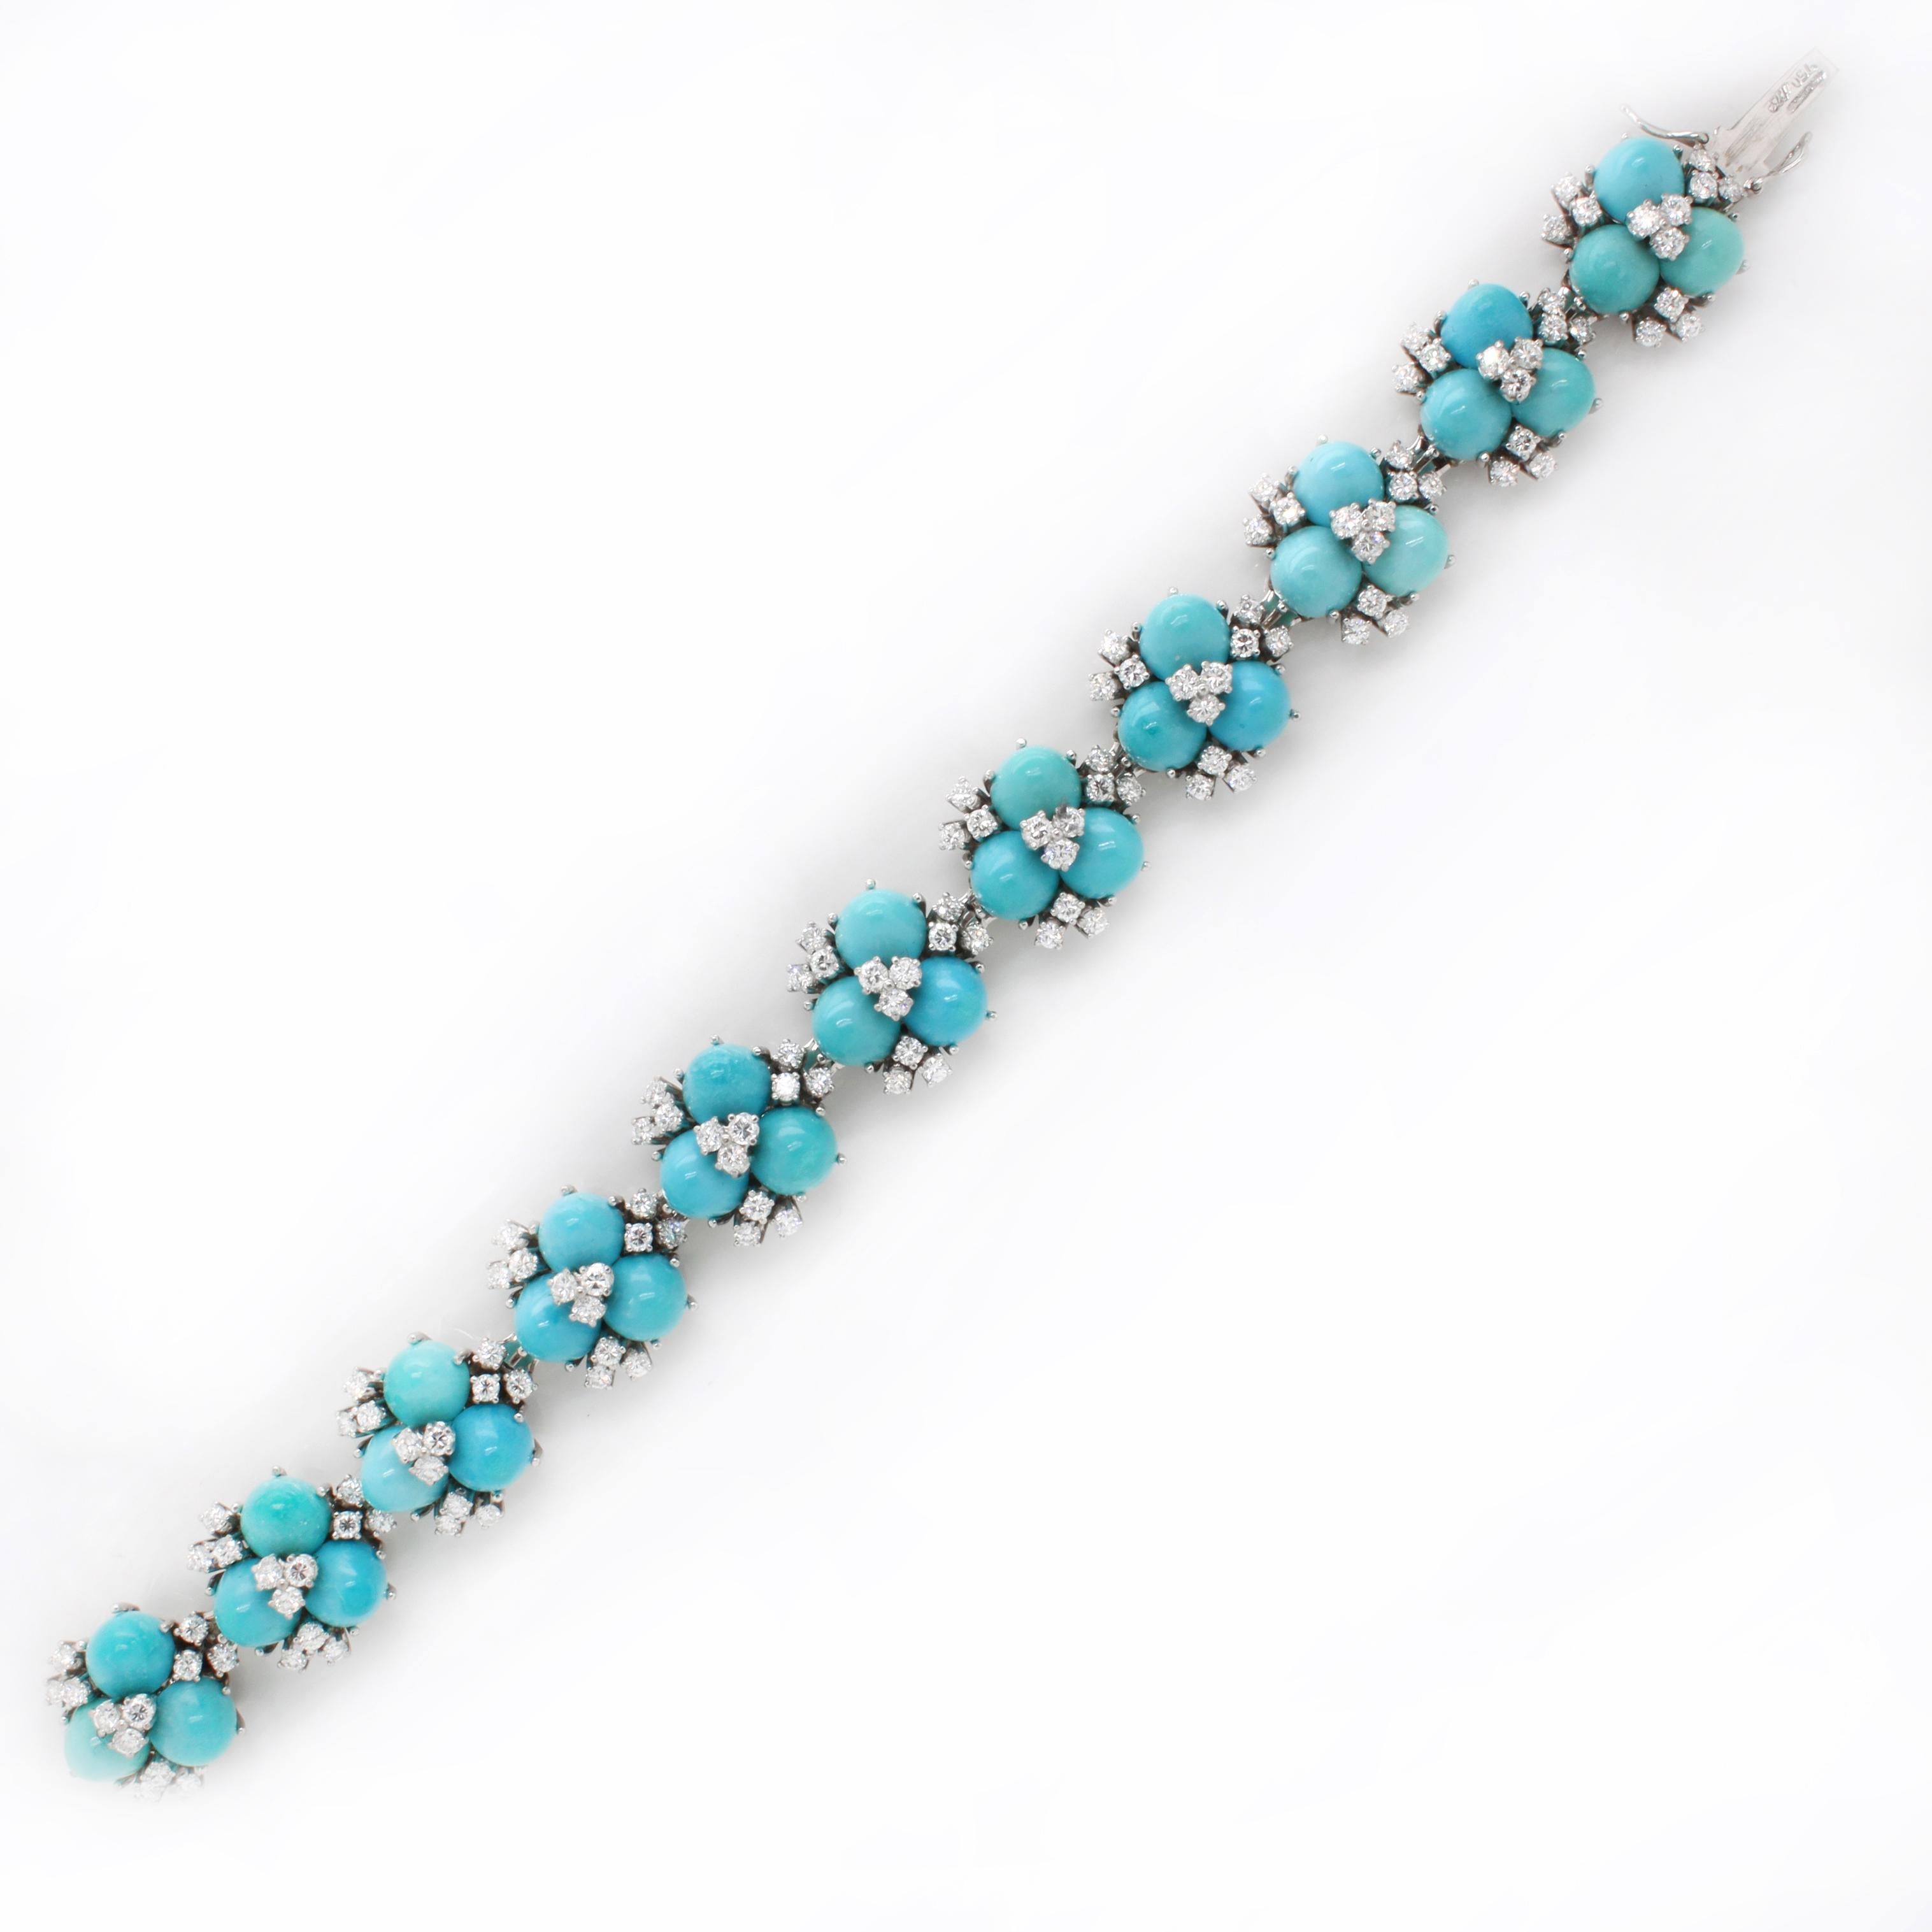 A beautiful turquoise and diamond bracelet made of 11 panels, each set with three turquoise sugarloafs and smaller round brilliant cut diamonds, in 18k white gold. The turquoises are nicely matched and they have a very refreshing and joyful colour.